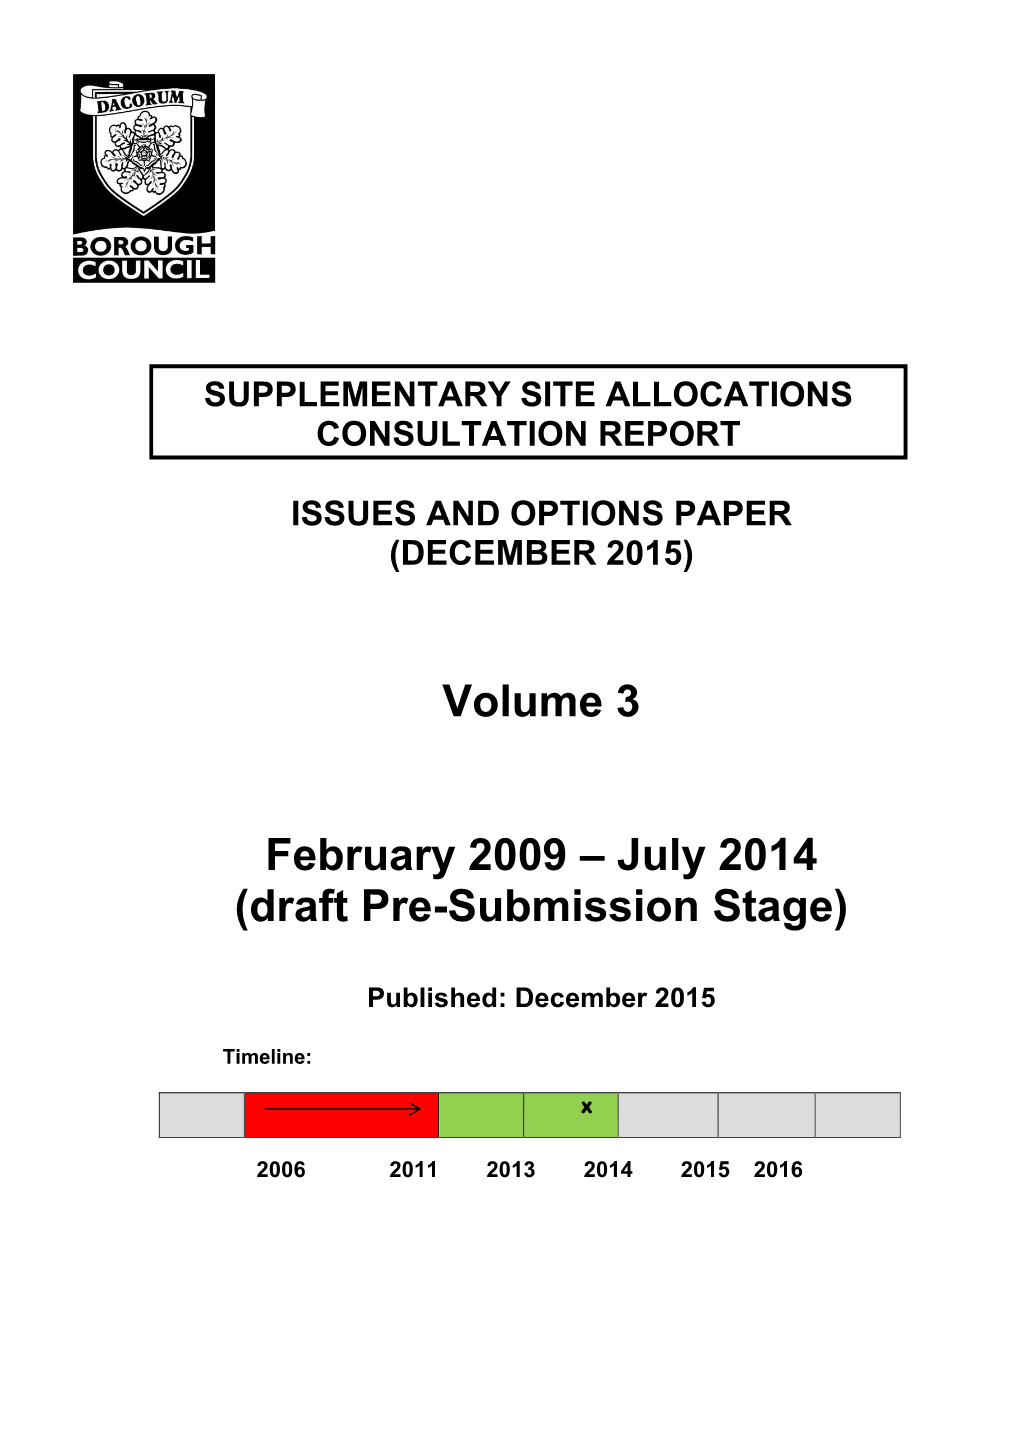 Volume 3 February 2009 – July 2014 Site Allocations Draft Pre-Submission Stage